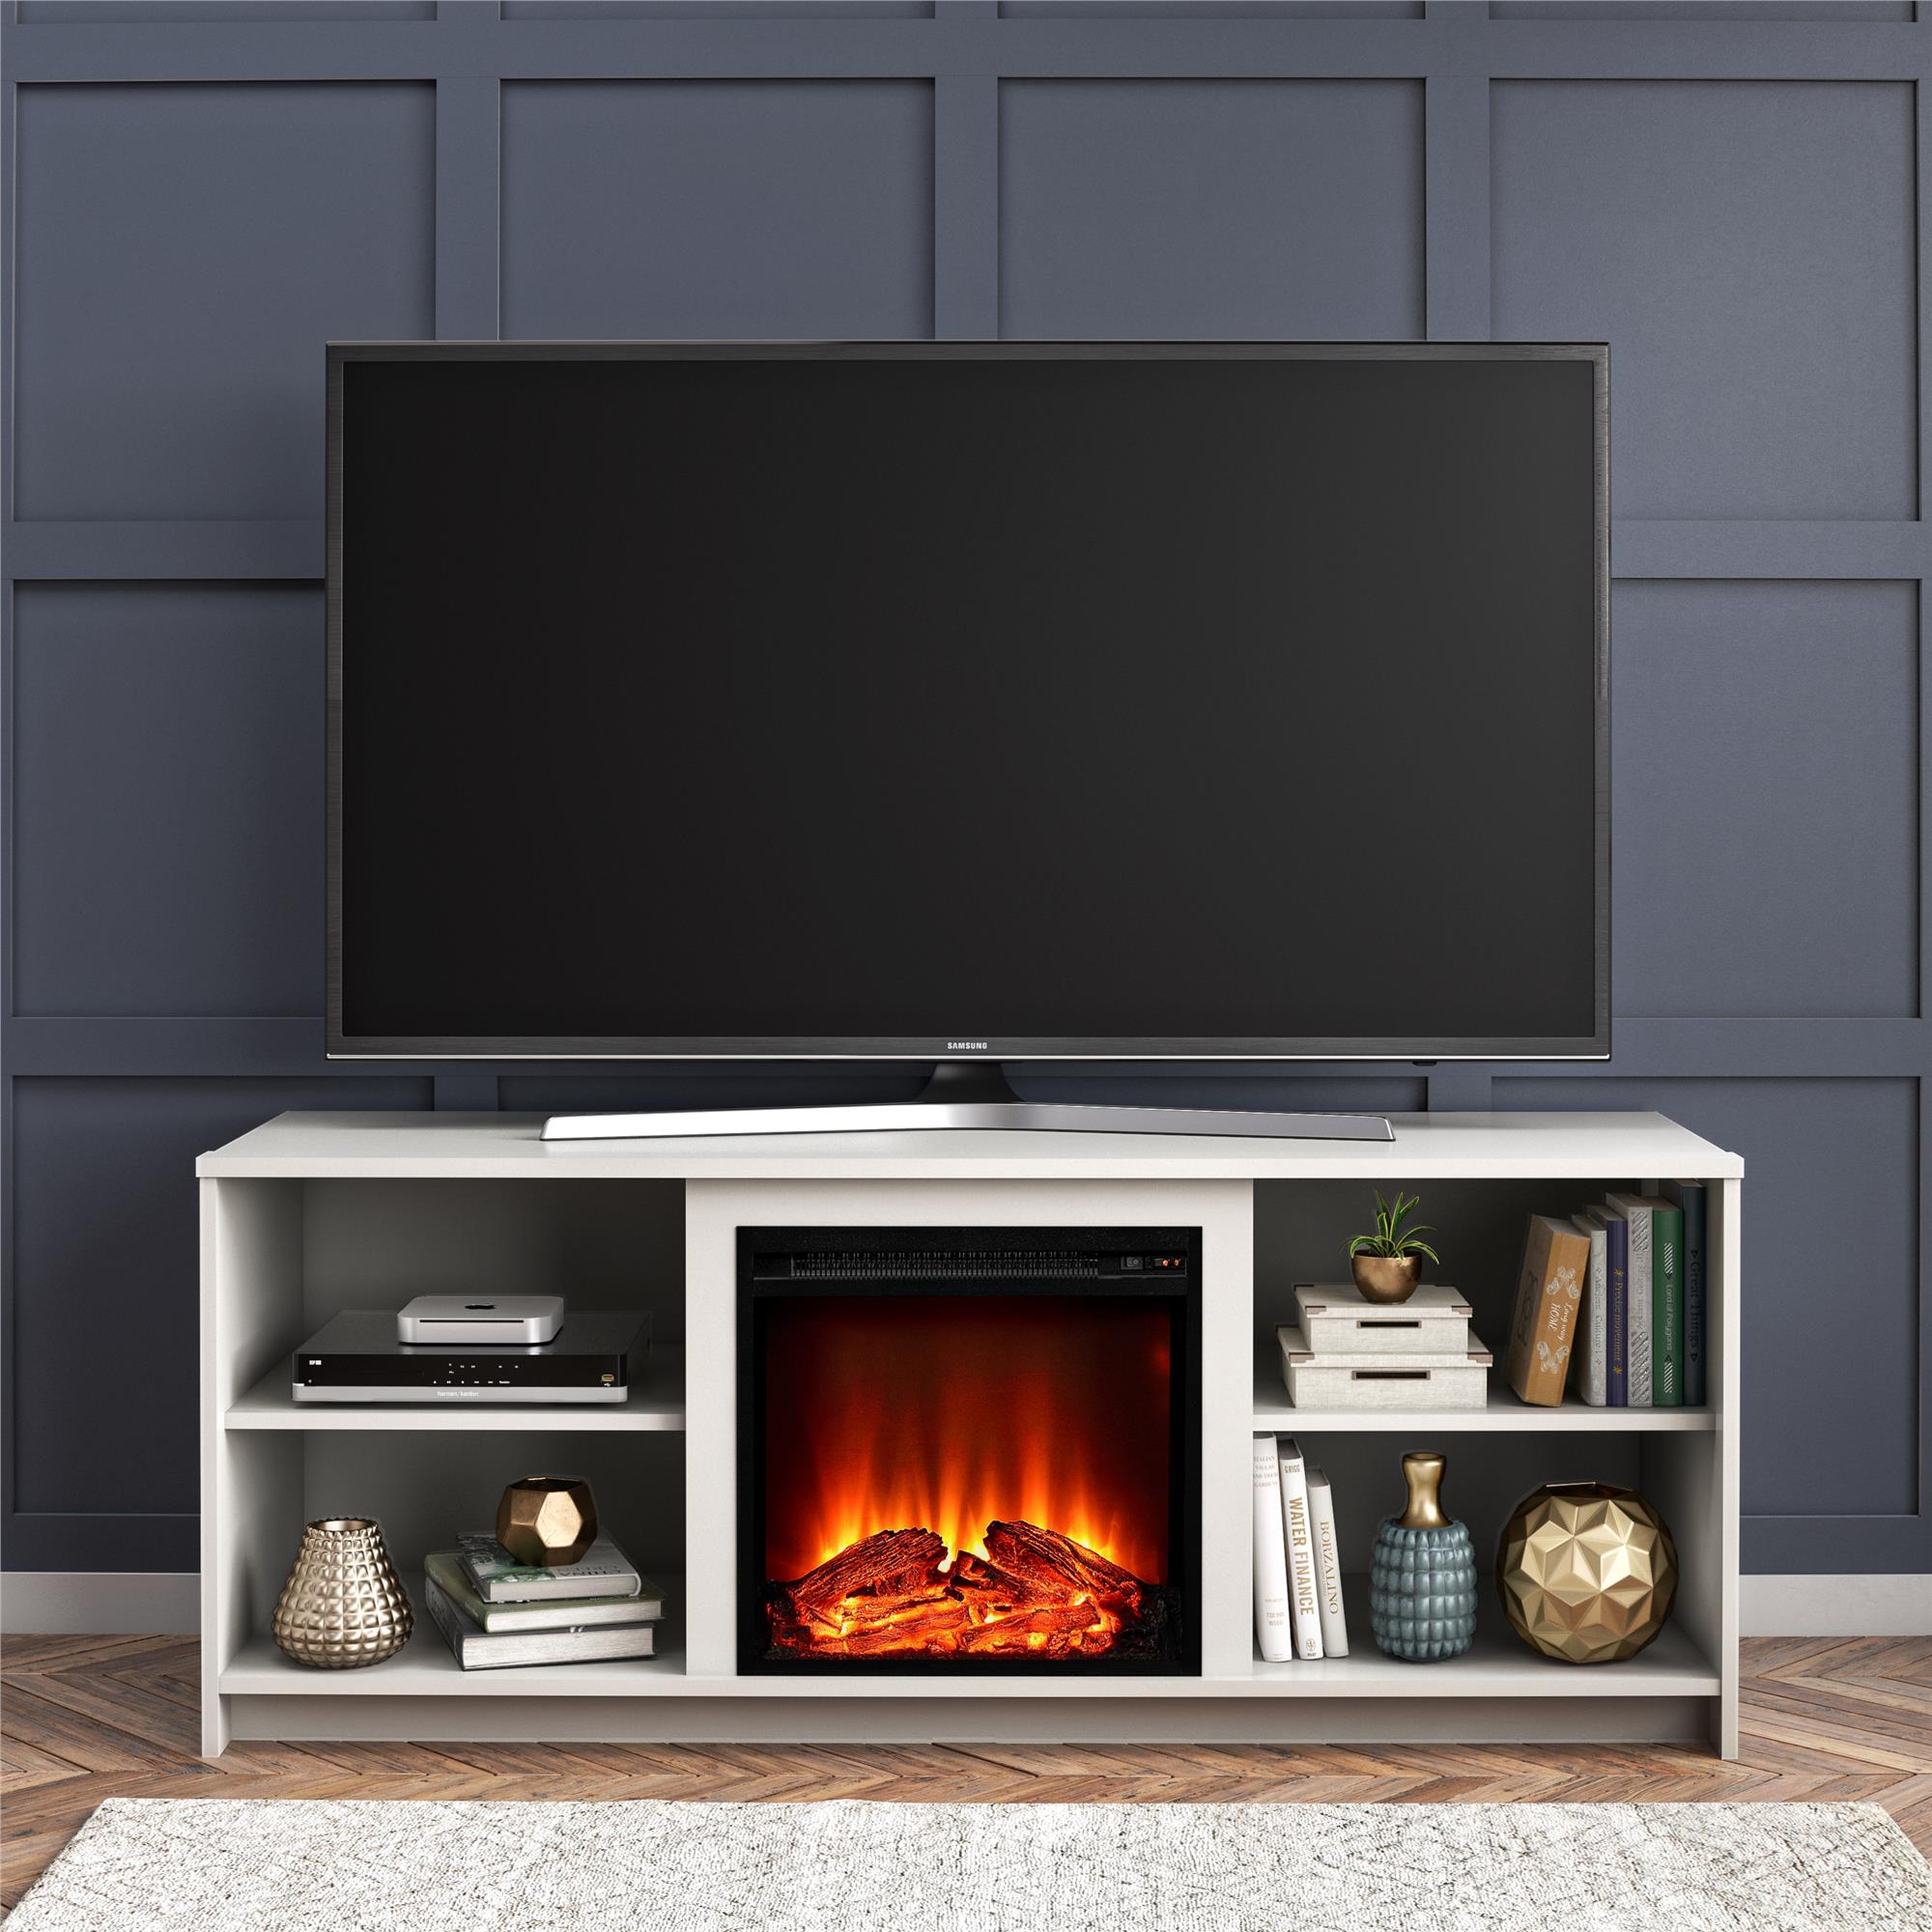 Mainstays Fireplace TV Stand for TVs up to 65", White - image 1 of 11